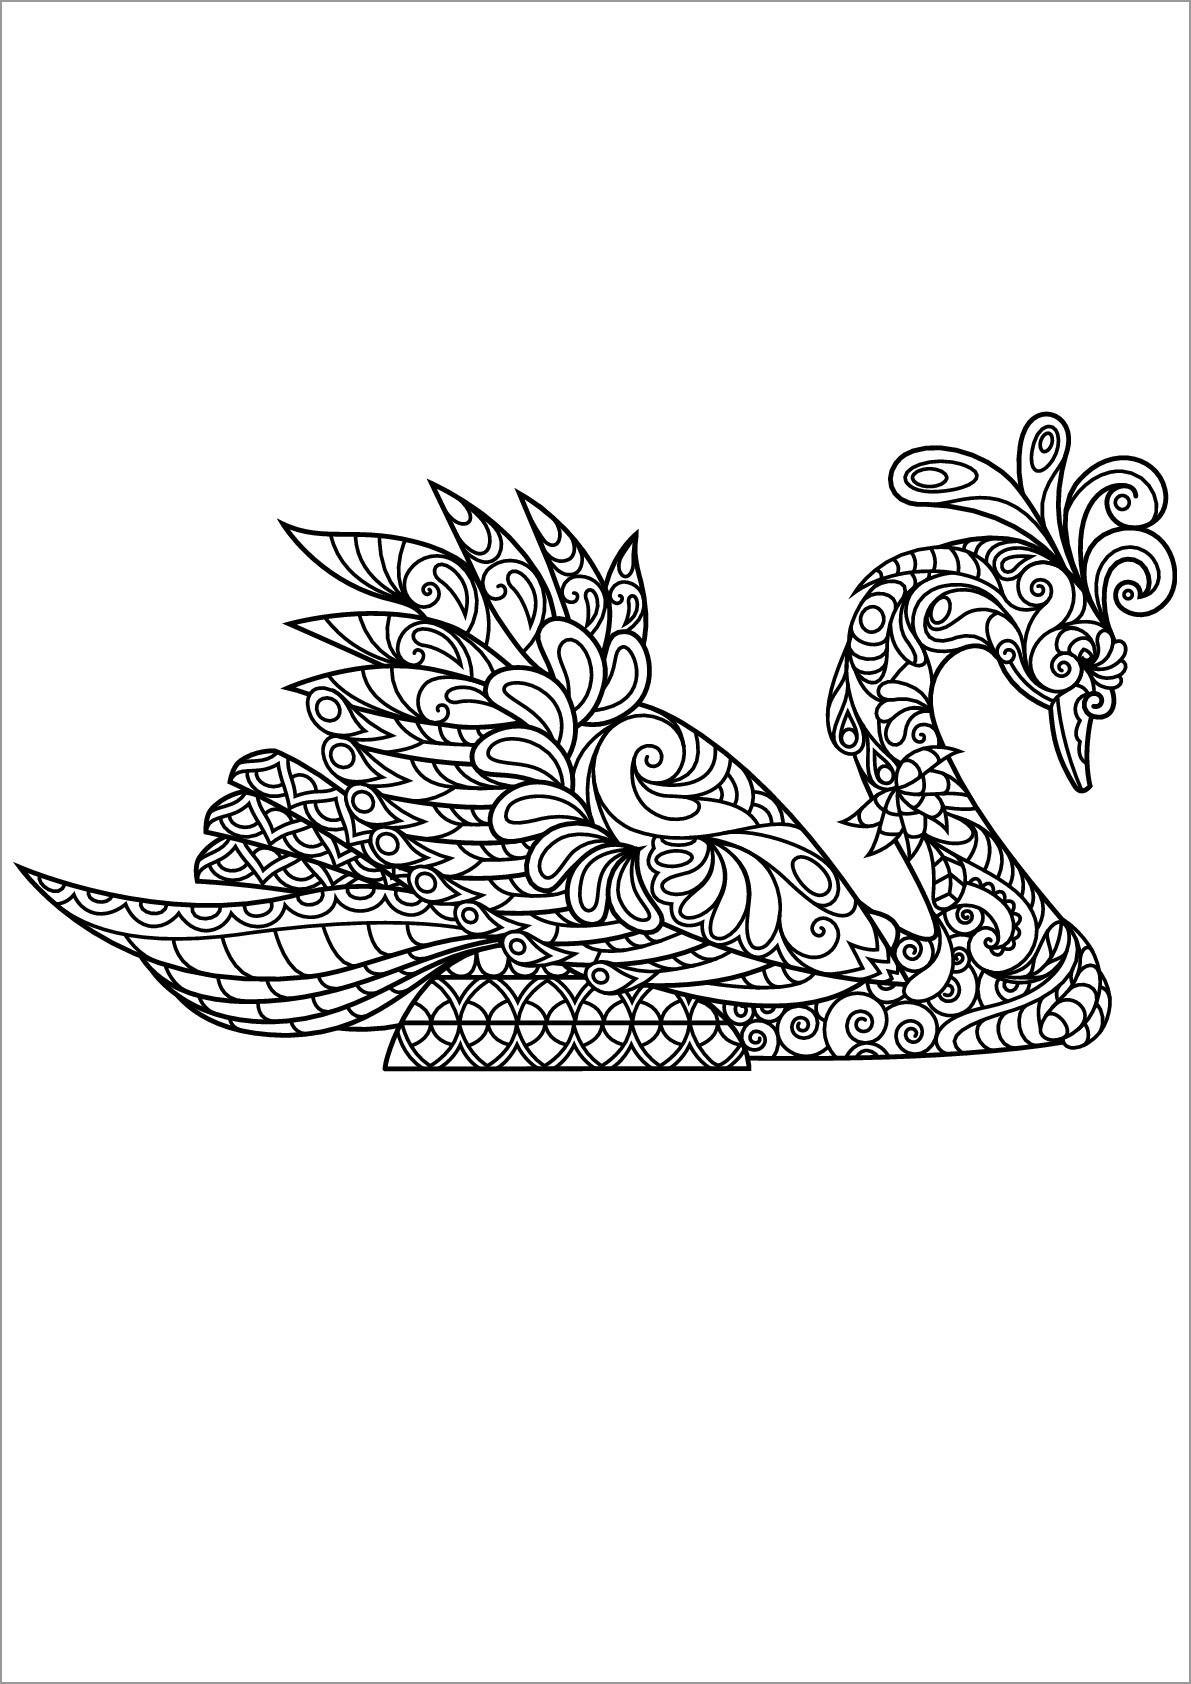 Zentangle Swan Mandala Coloring Page for Adult